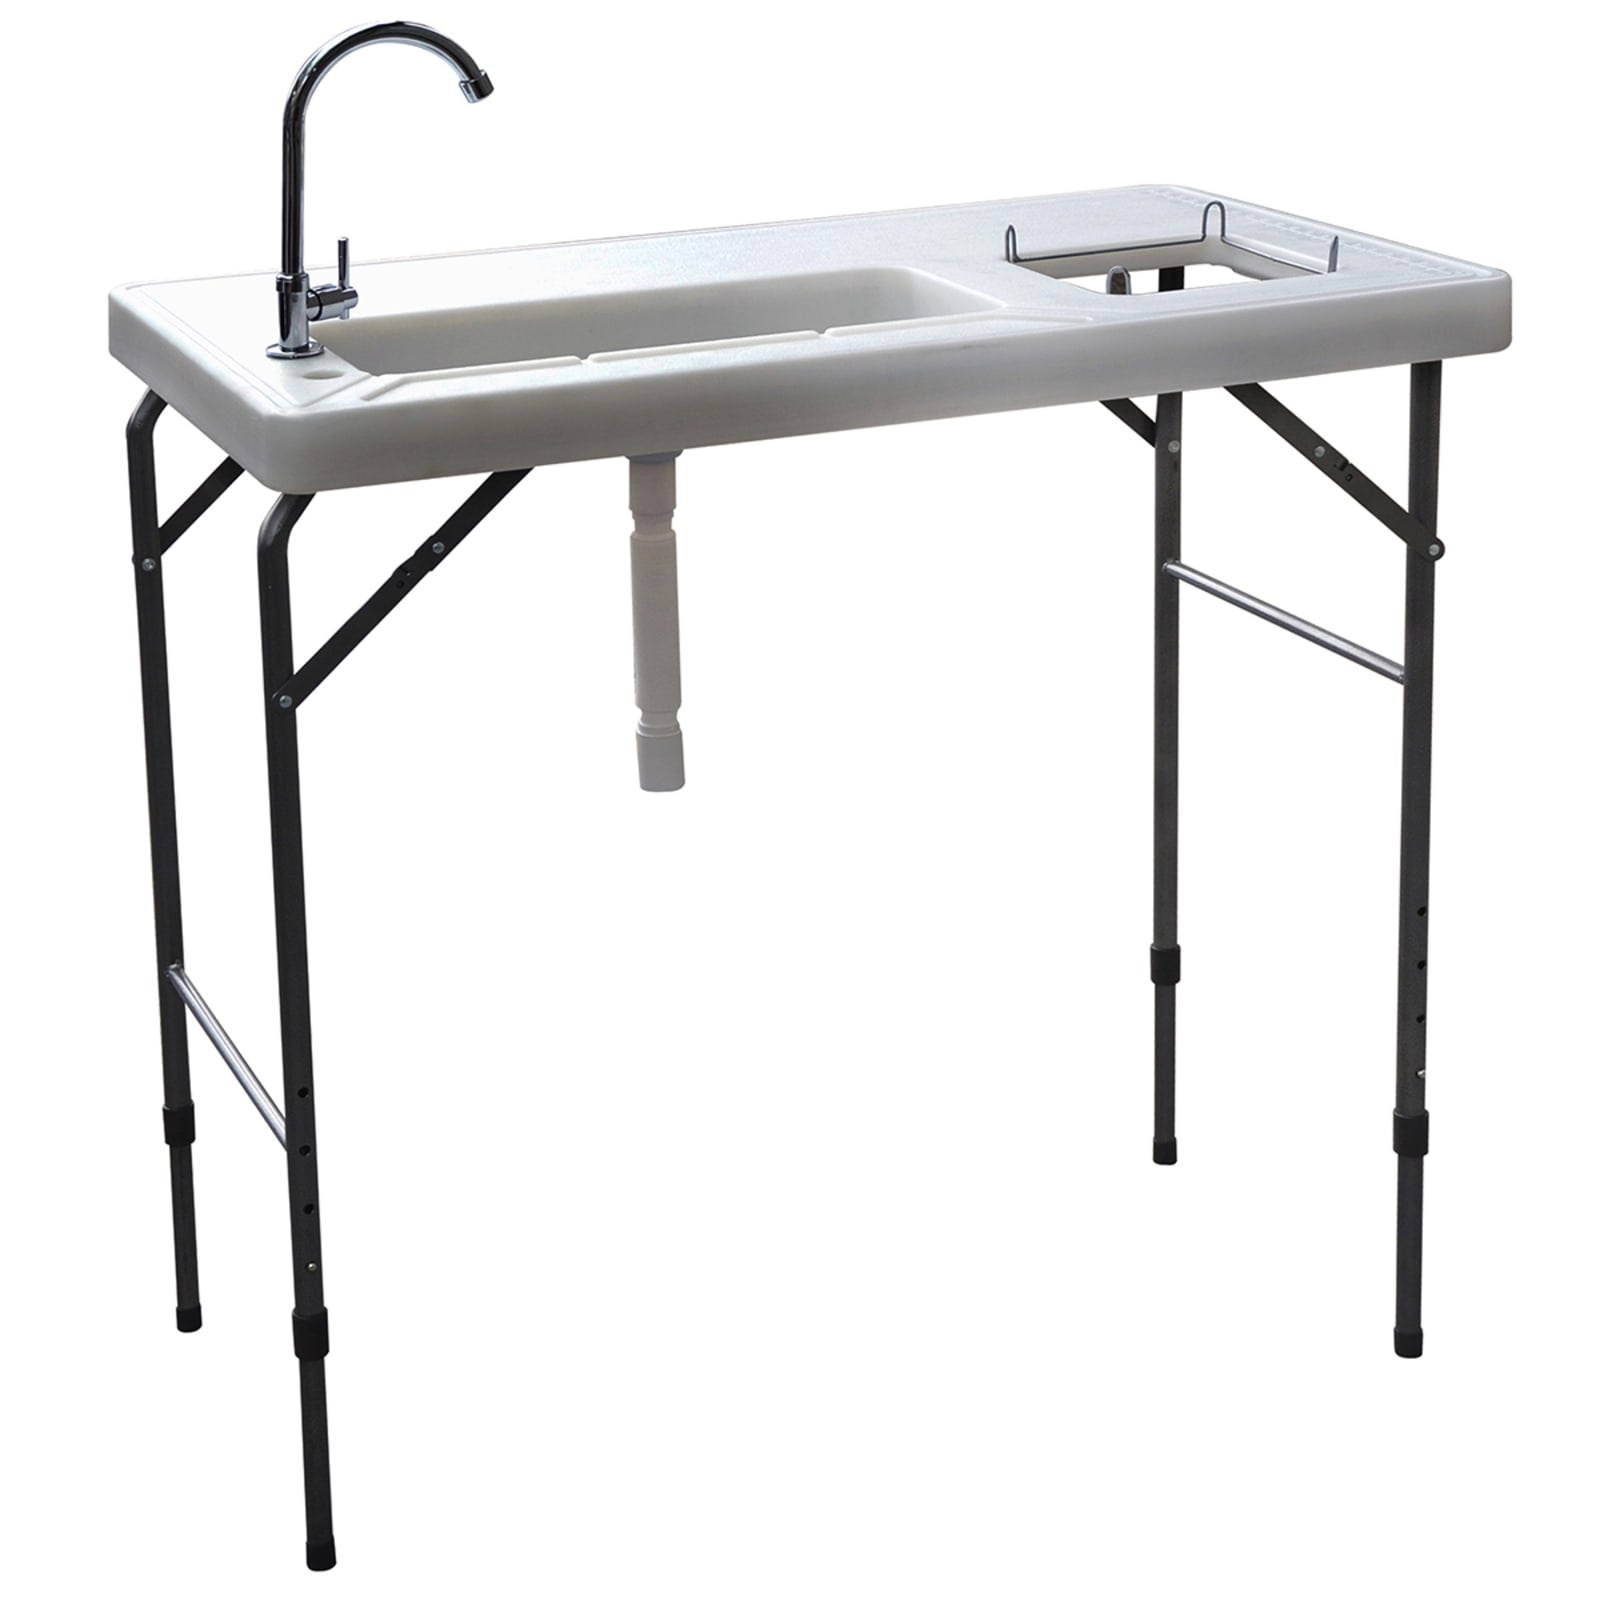 Folding Fish and Game Cleaning Table